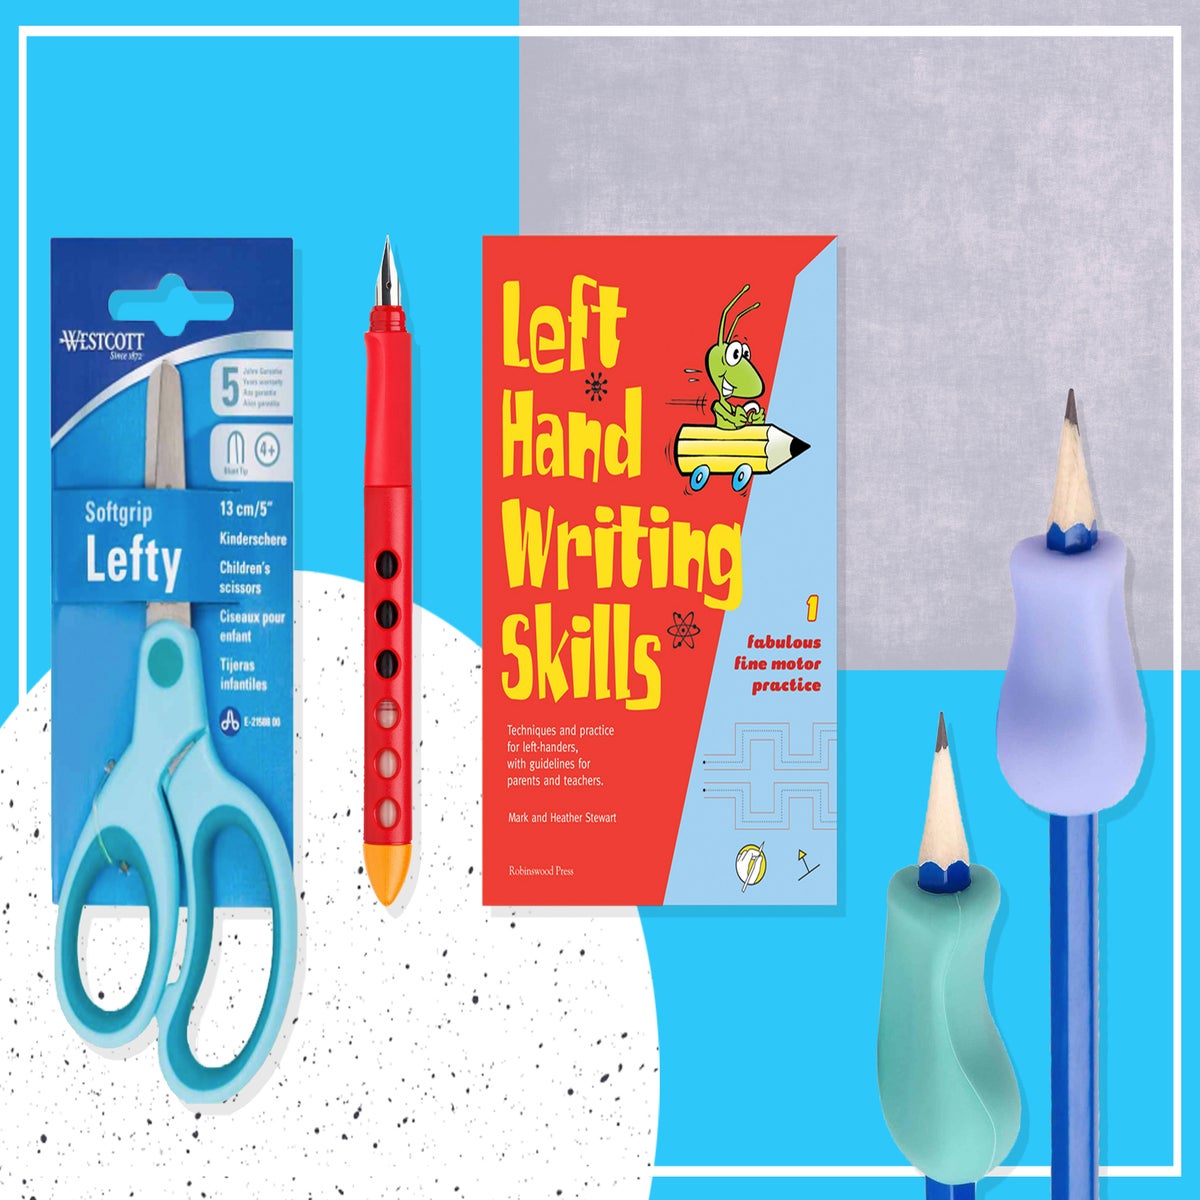 15 Tools Made Specifically for Lefties